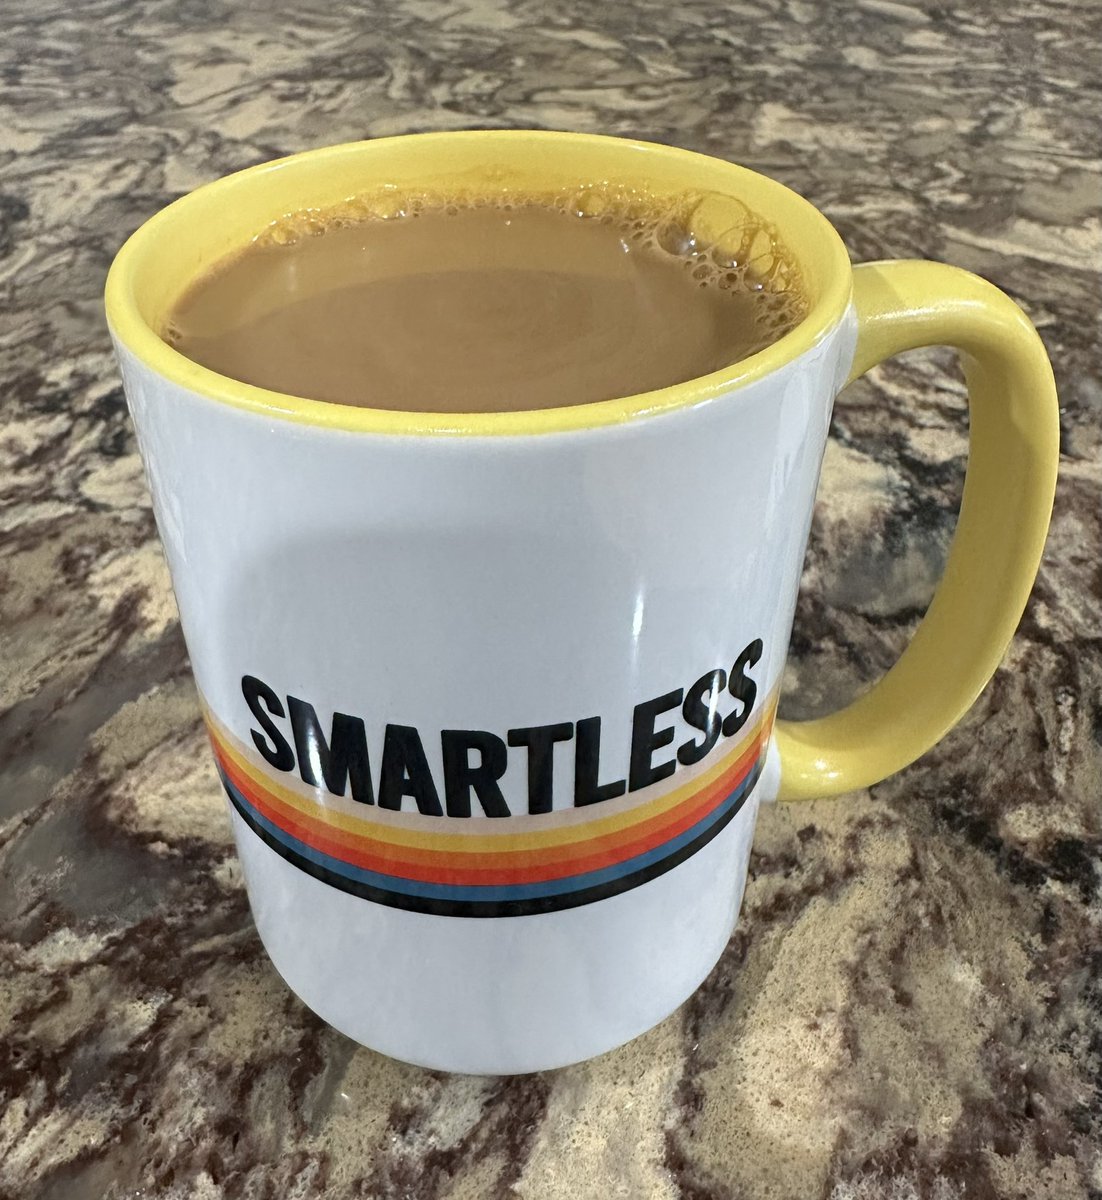 Enjoying this morning’s coffee with my @SmartLess coffee mug, part of bday present from my daughter. Makes my coffee taste better for certain! 😀☕️